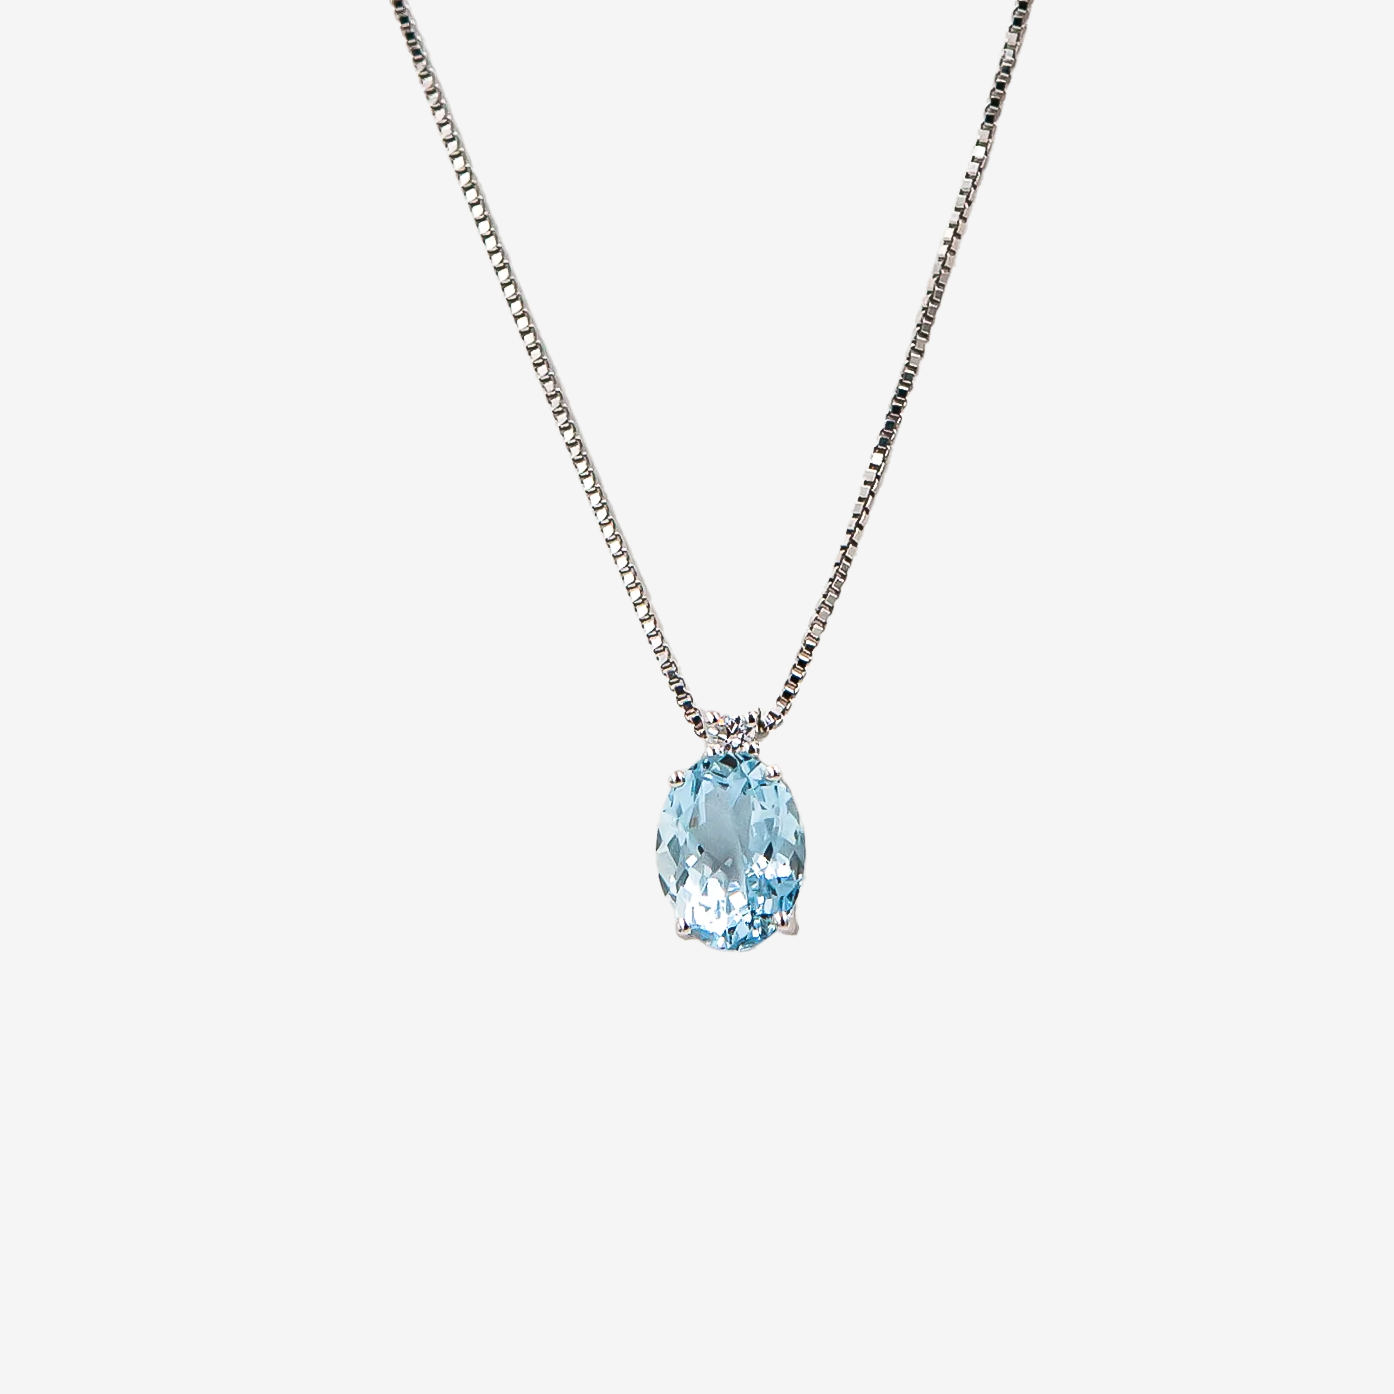 Droplet necklace with Aquamarine 1.70 ct